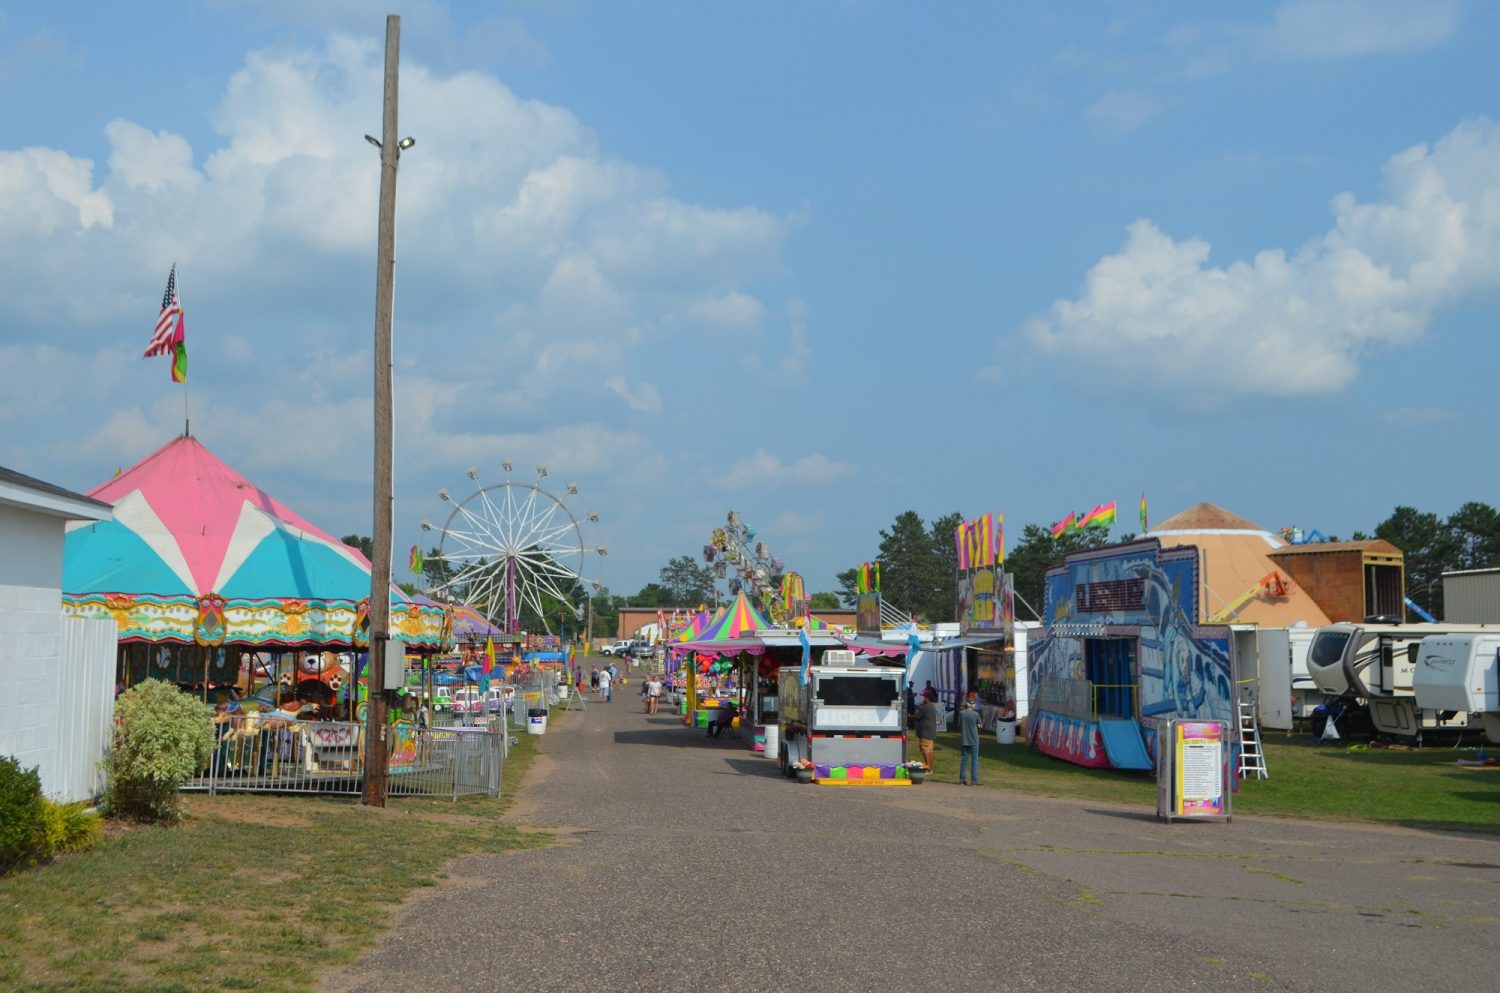 A preview of this week's 130th Annual Lincoln County Fair Merrill